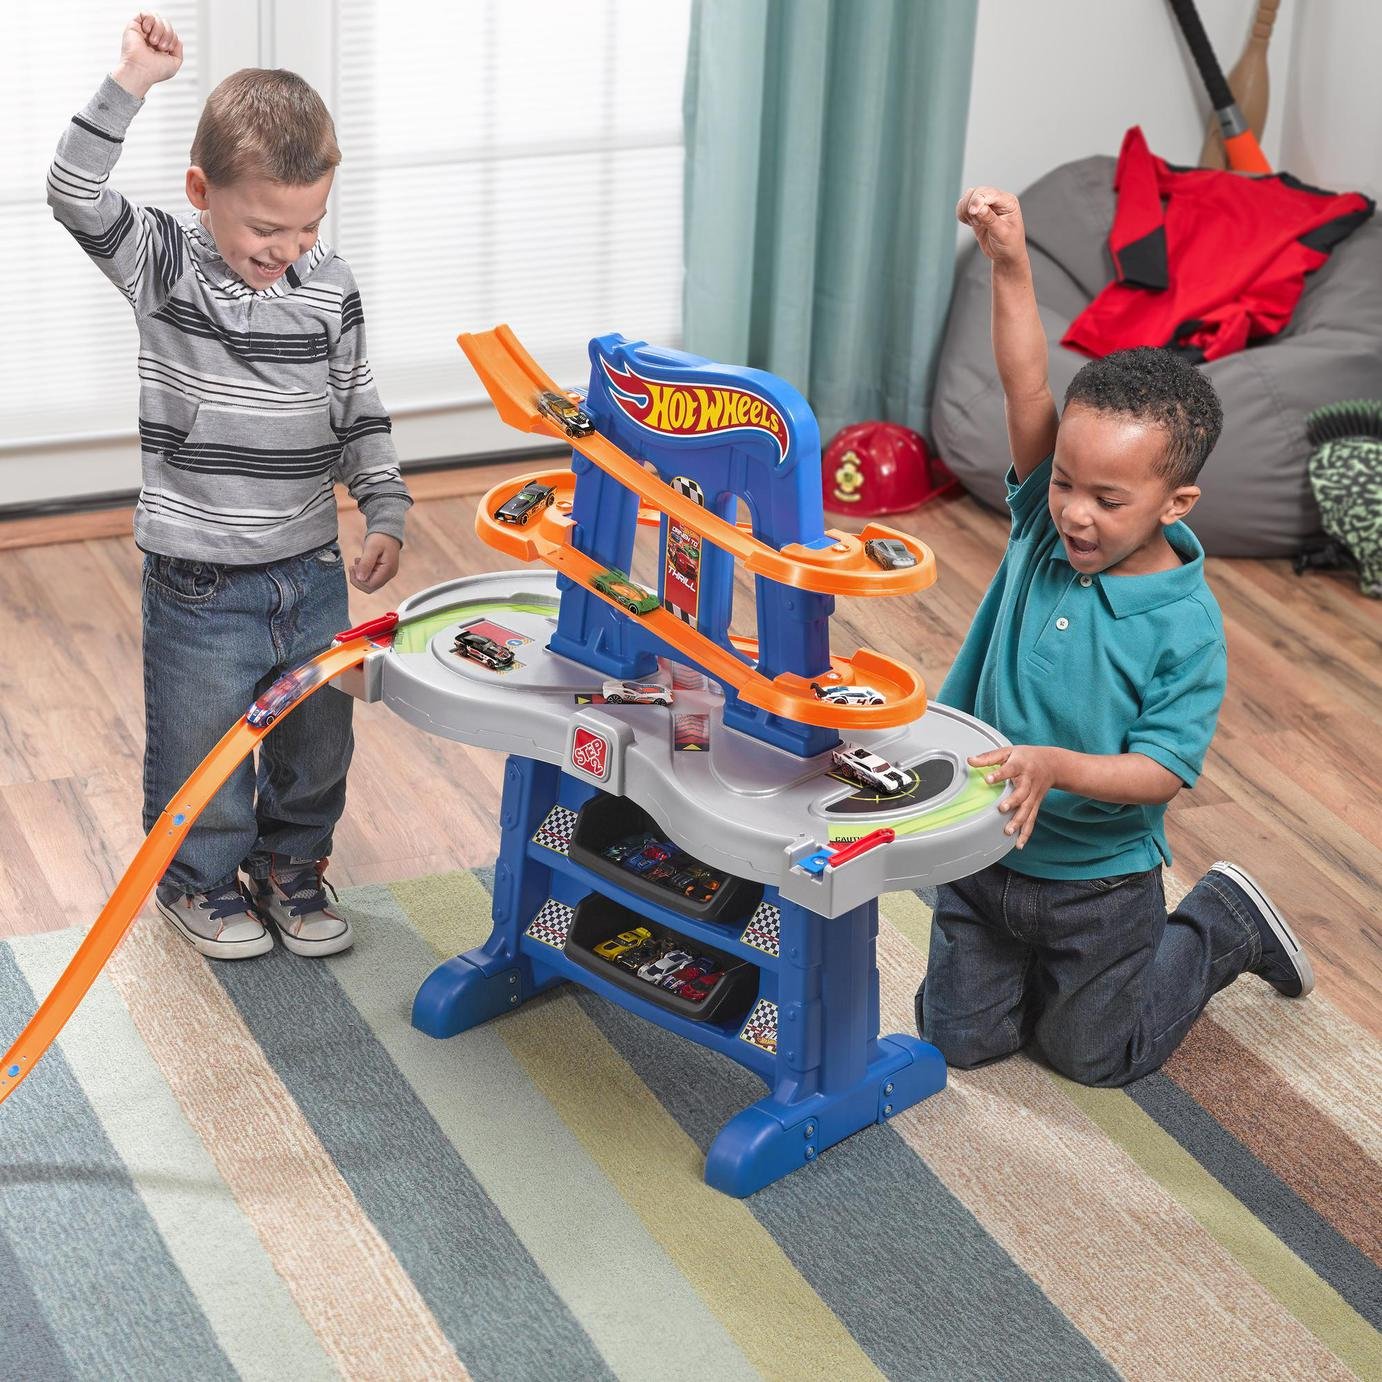 This Step2 Hot Wheels Car & Track Table